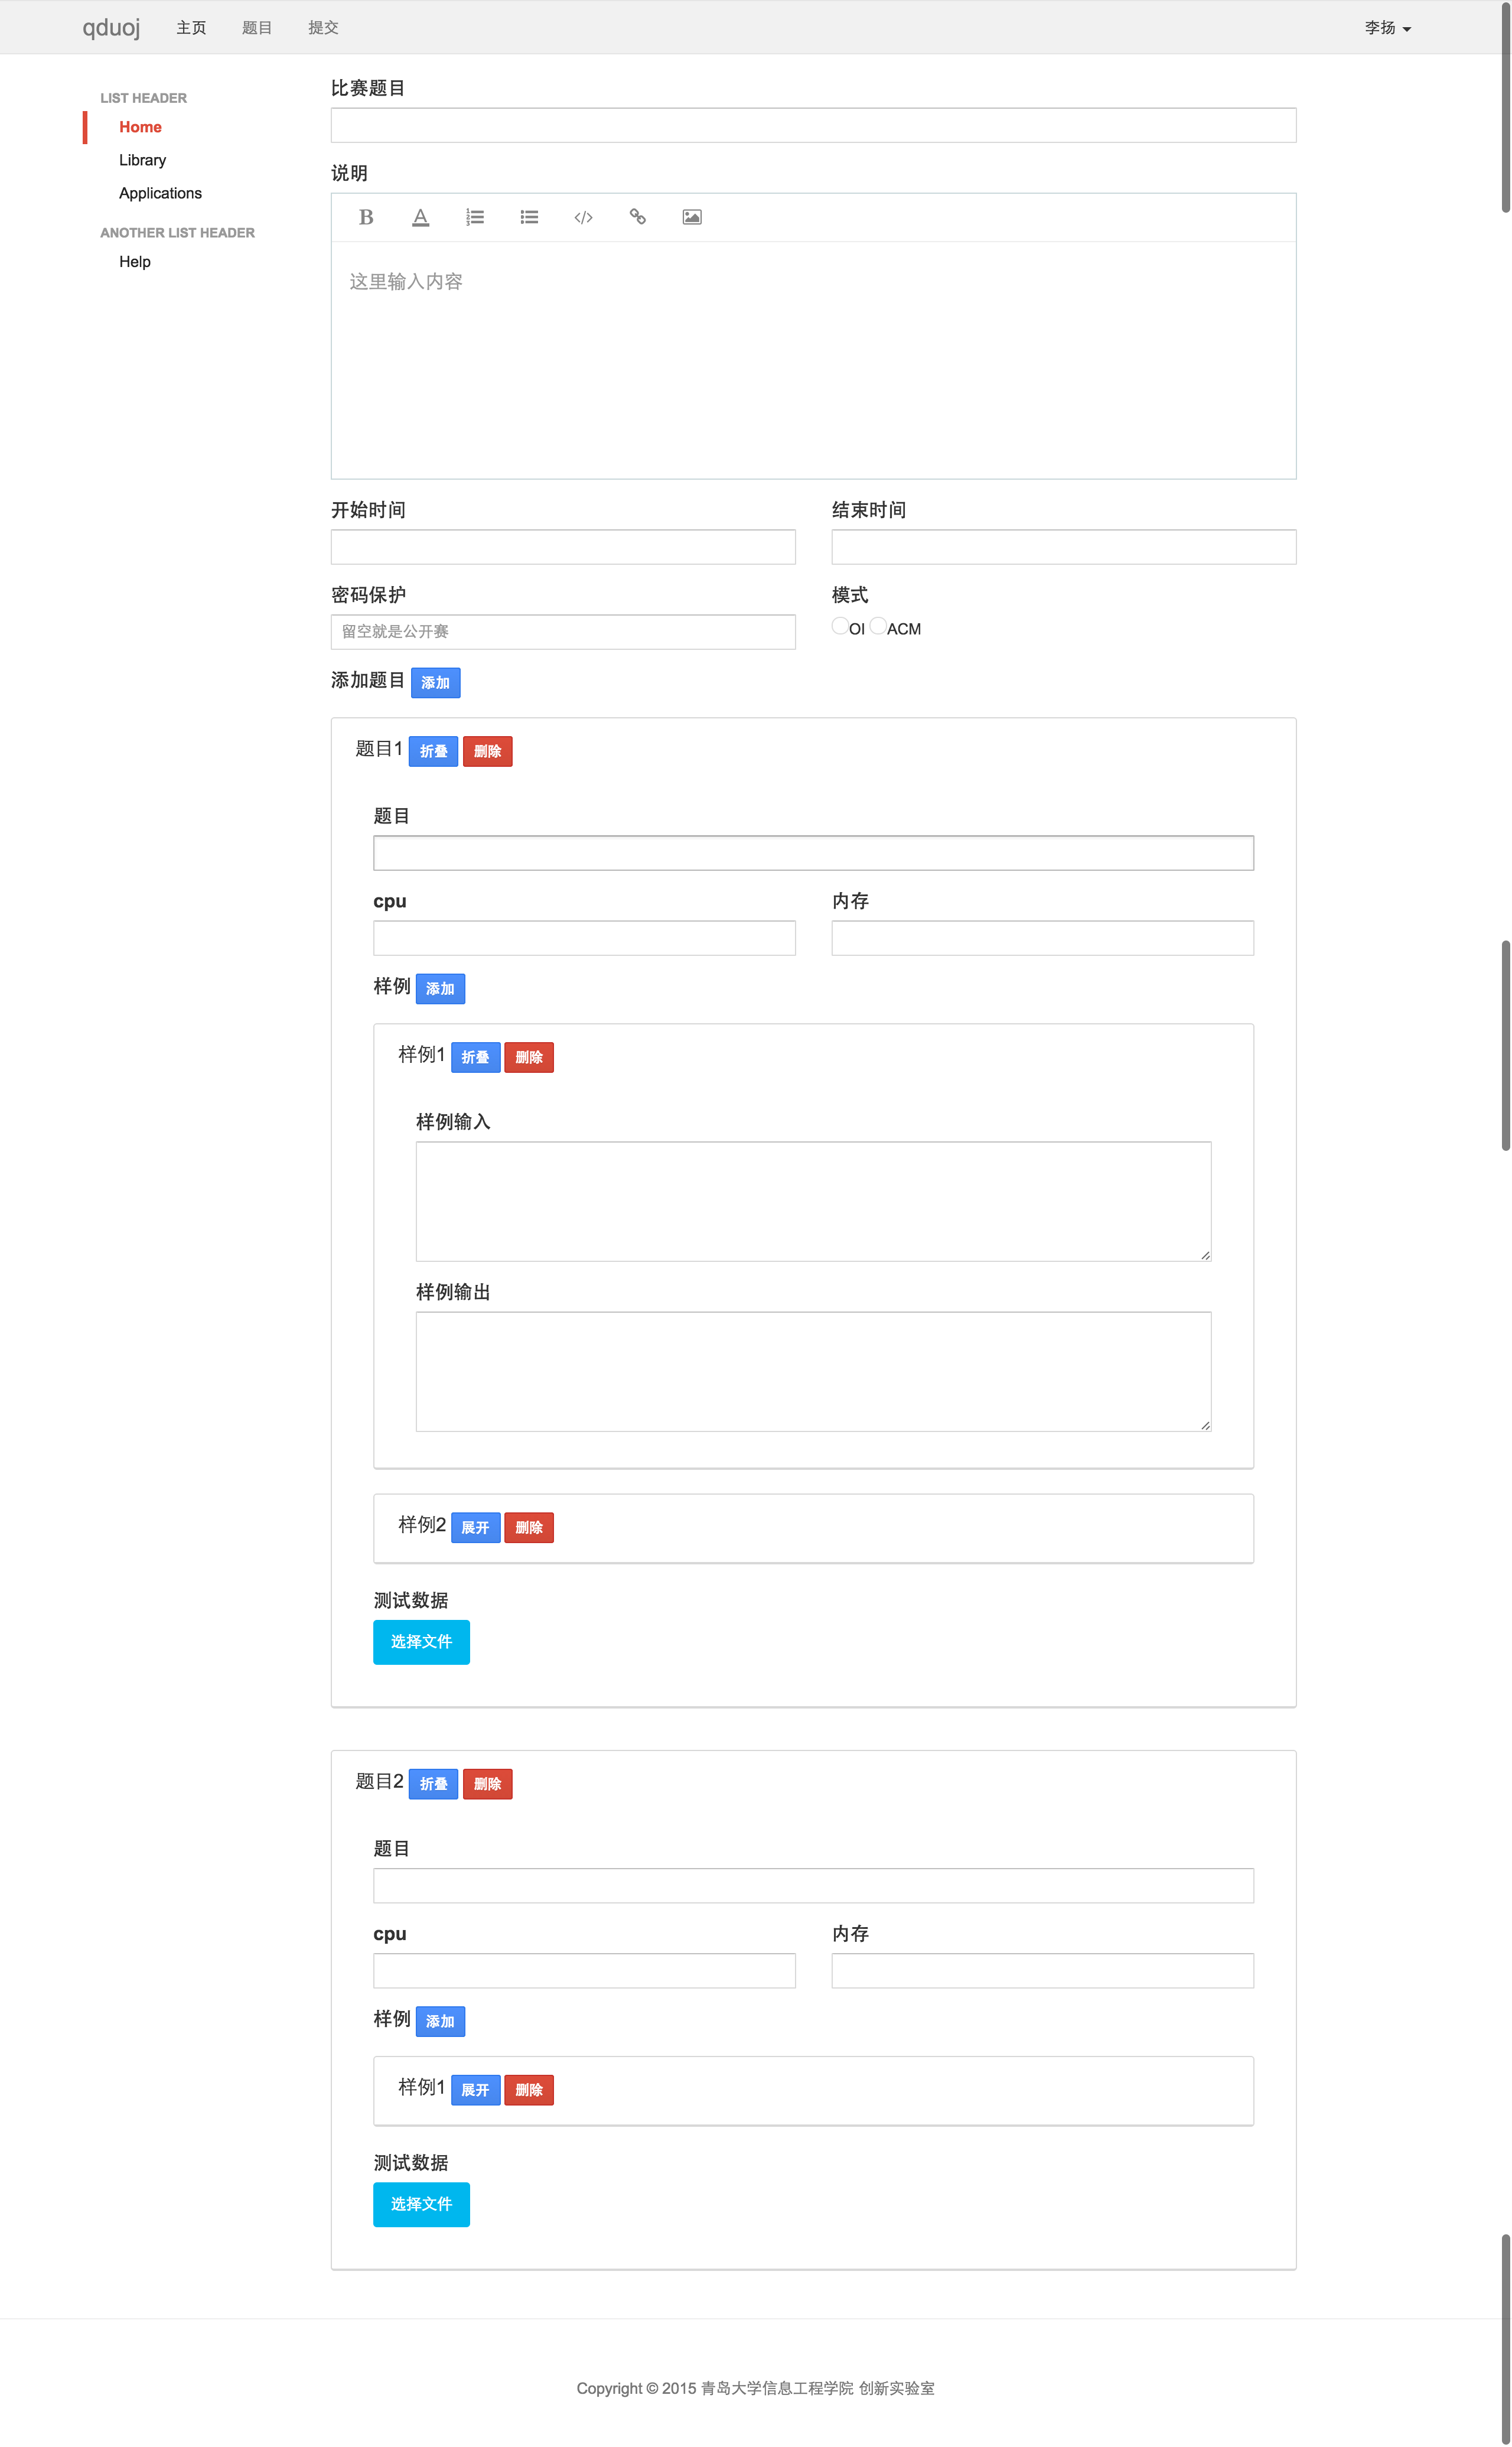 FireShot Capture - TODC Bootstrap 101 Te_ - http___localhost_63342_template_add_contest_require.html.png